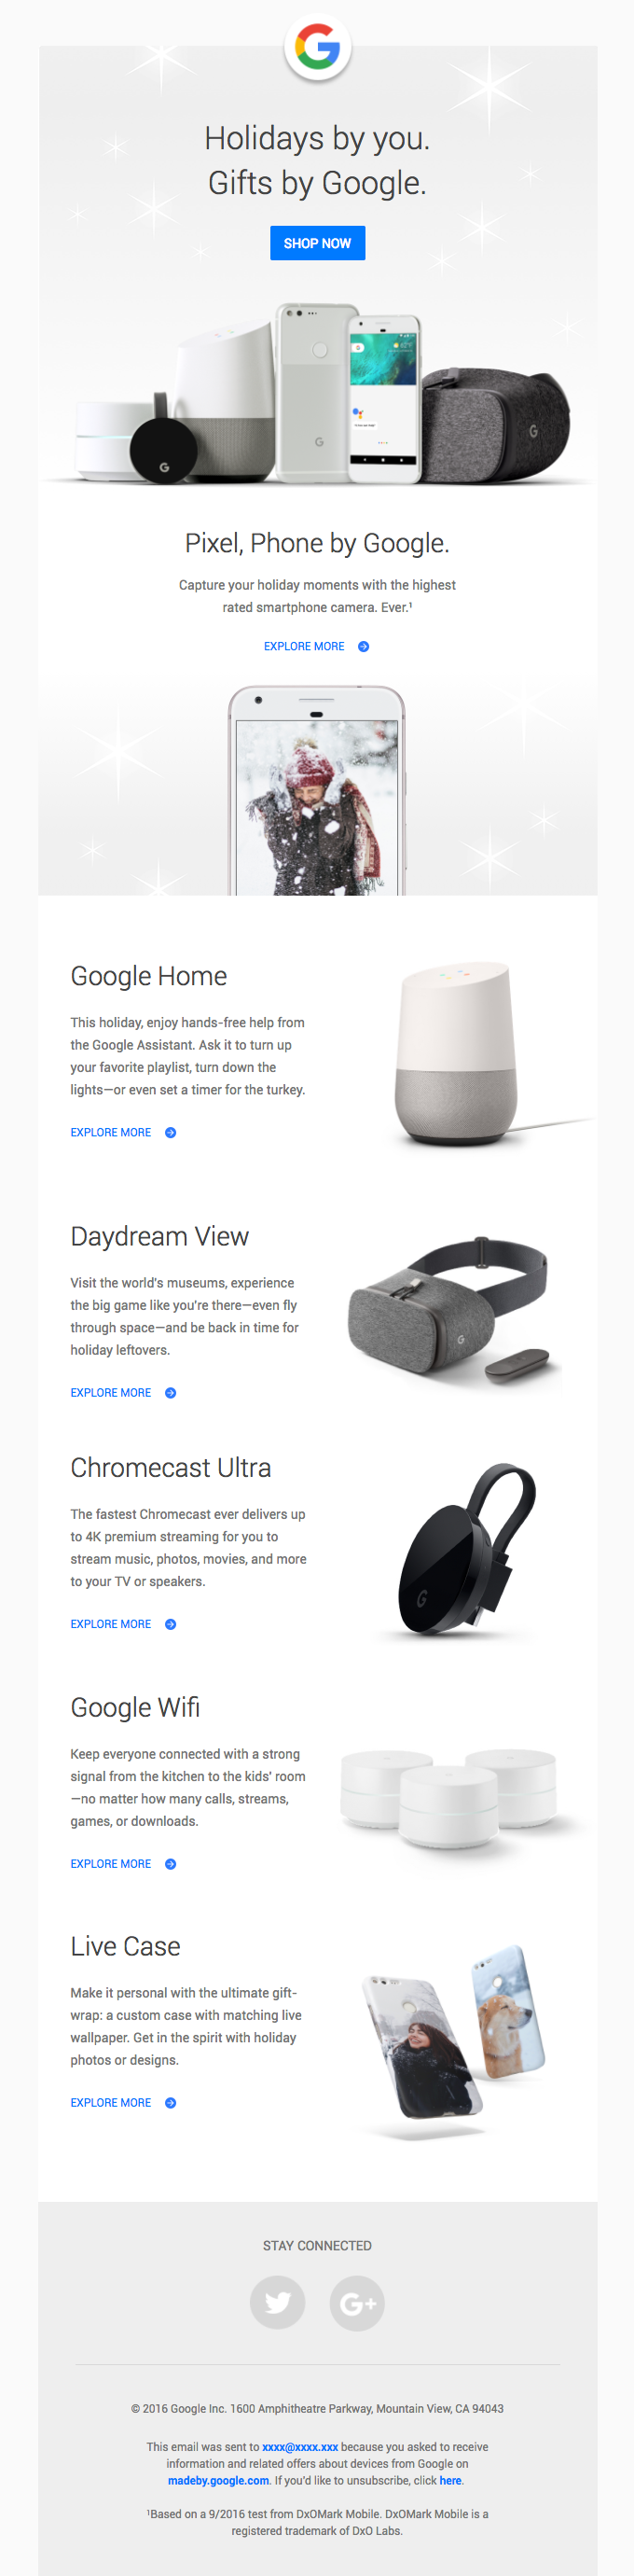 Med andre band død Gutter Give the gift of Google: Pixel, Daydream View, Google Home, Chromecast  Ultra—and more - Desktop View | Really Good Emails